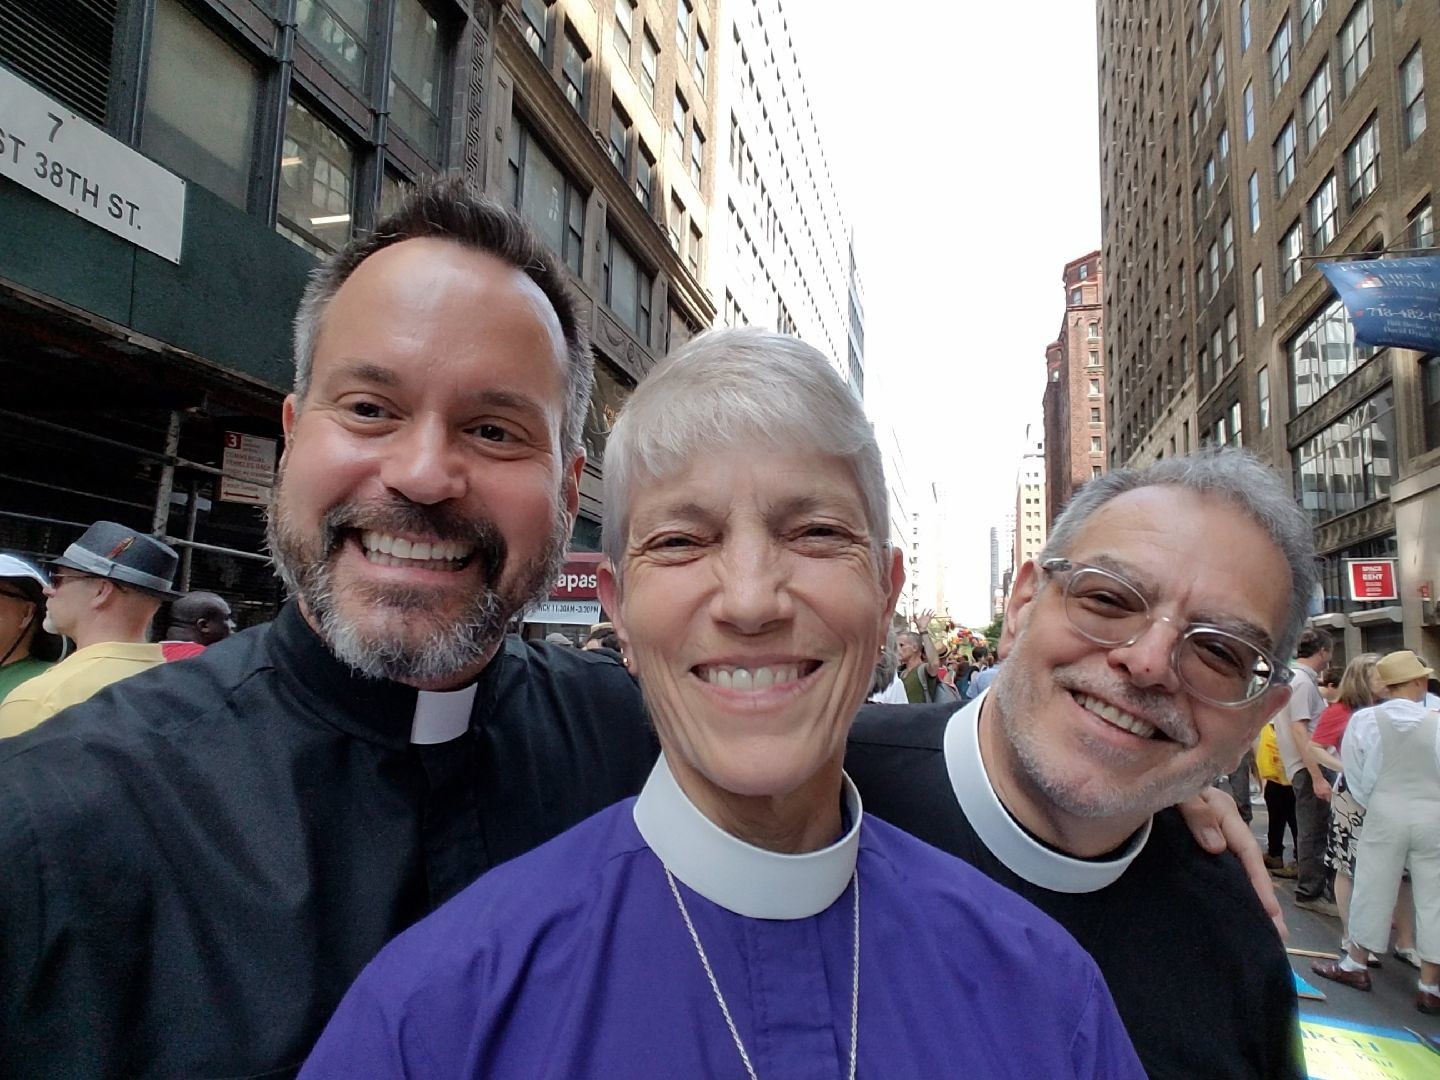 The Rev. J. Christopher Ballard, left, rector of Trinity-St. John’s Church in Hewlett; the Right Rev. Mary D. Glasspool, assistant bishop of the Episcopal Diocese of New York; and the Rev. Michael Delaney, canon pastor of the Cathedral of the Incarnation in Garden City, attended the New York City Pride Parade last year.